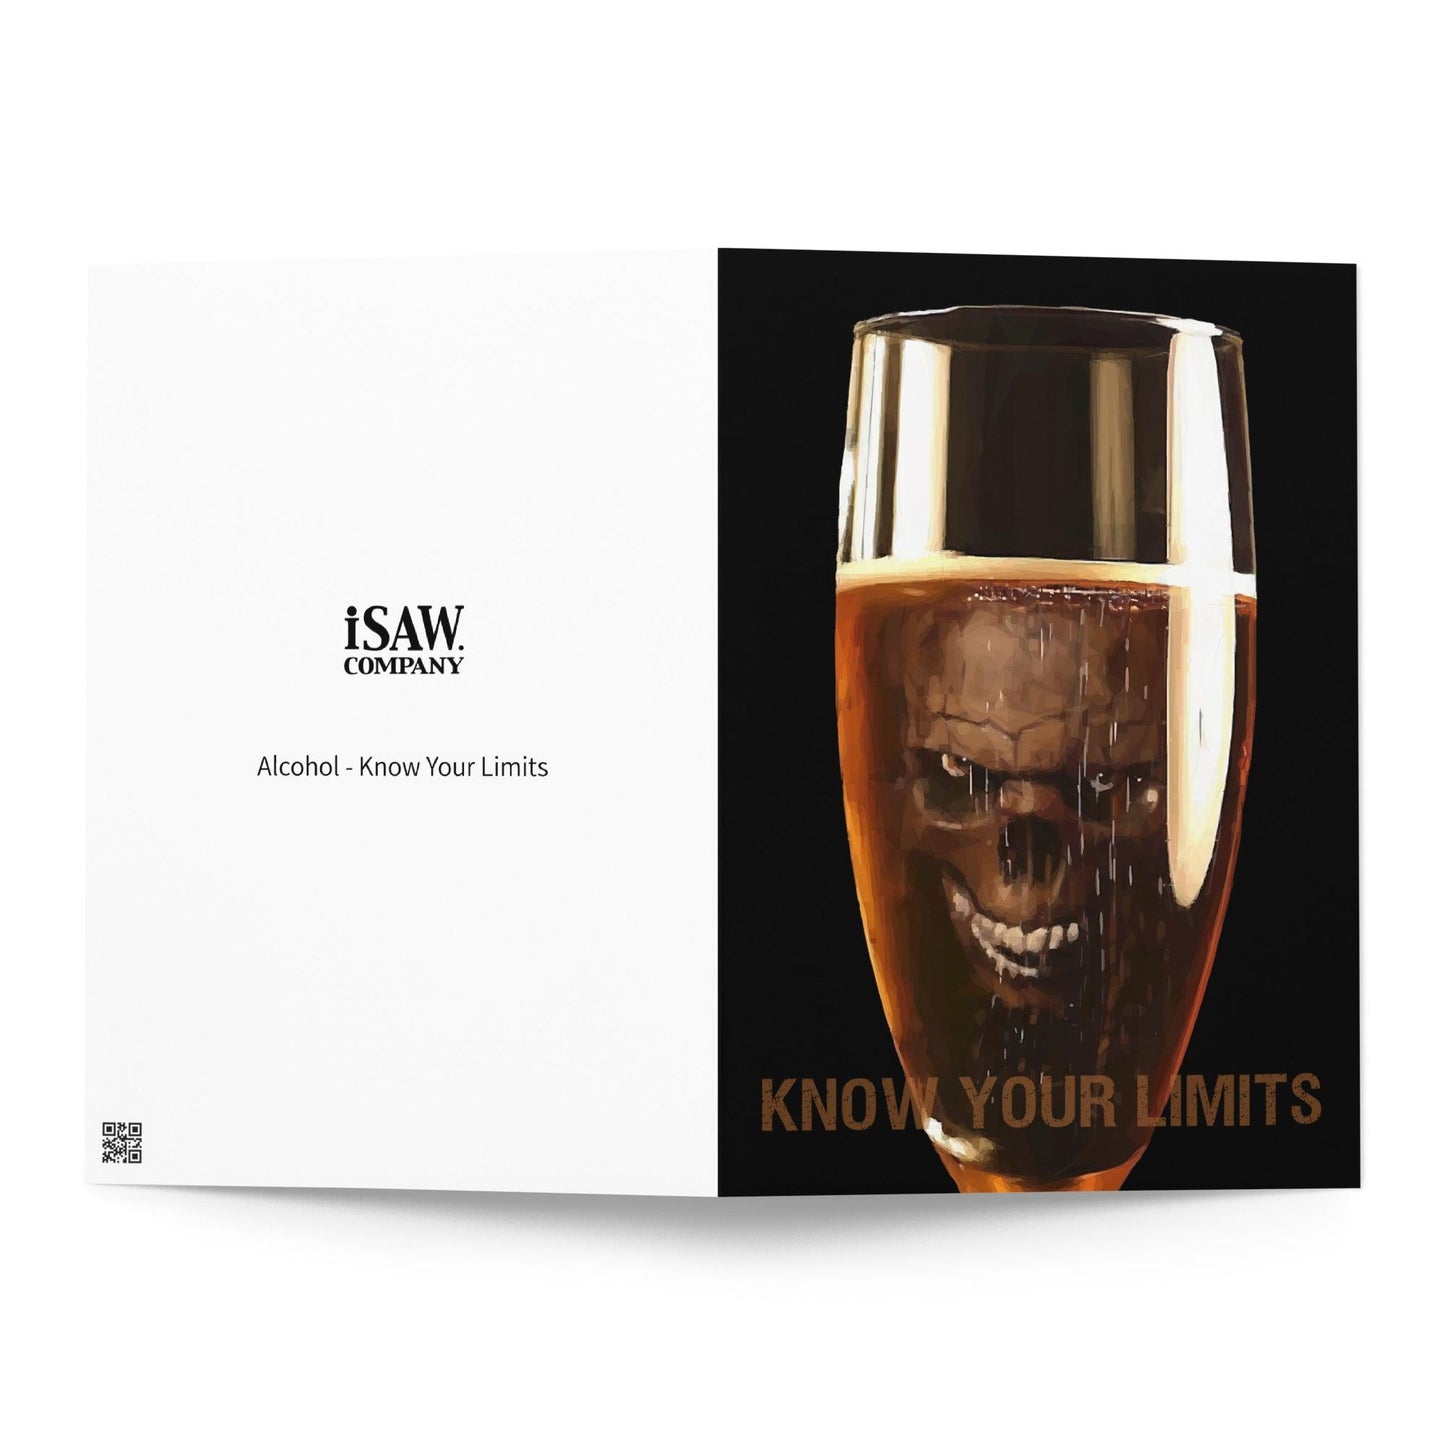 Alcohol - Know Your Limits - Note Card - iSAW Company